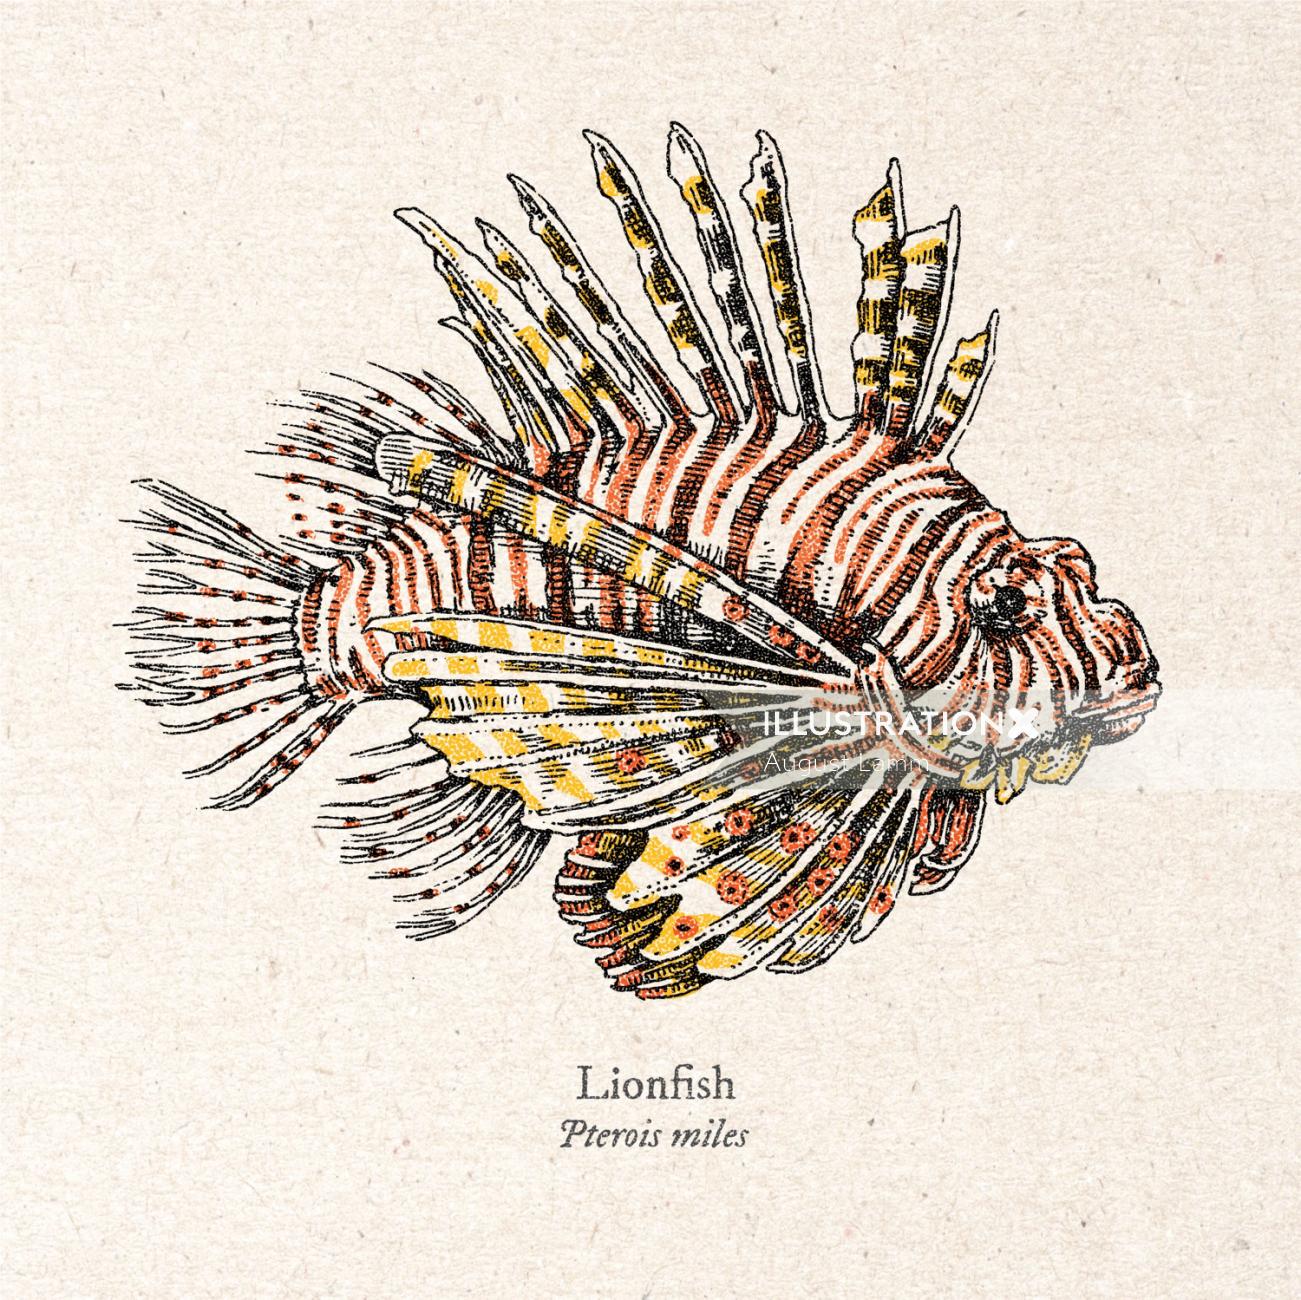 Lion fish Realistic artwork by August Lamm